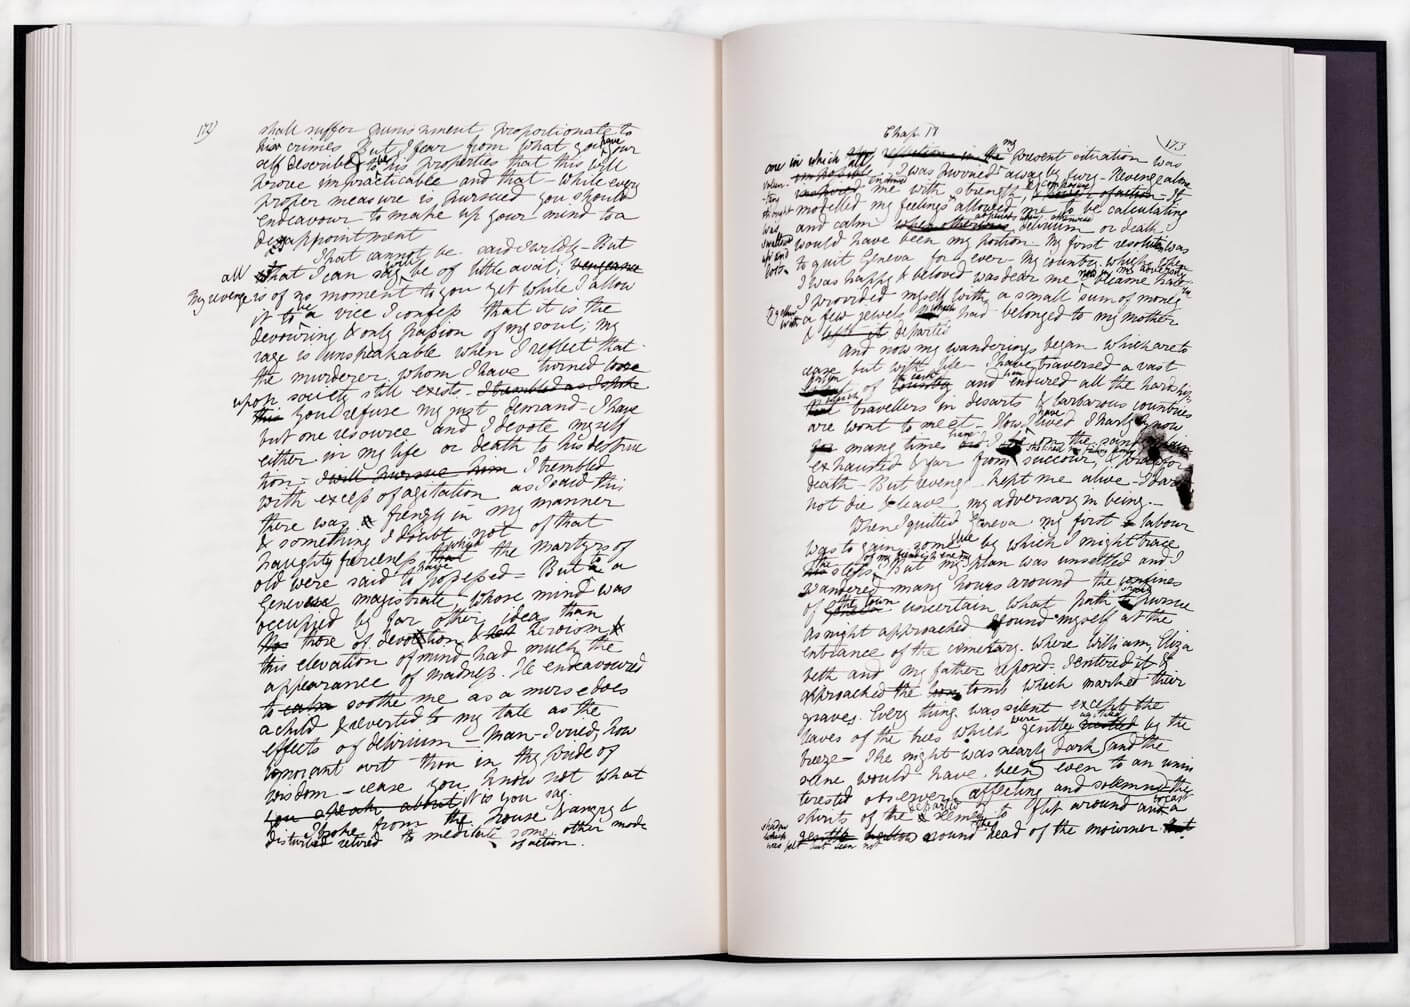 the original manuscript of Frankenstein by Mary Shelley